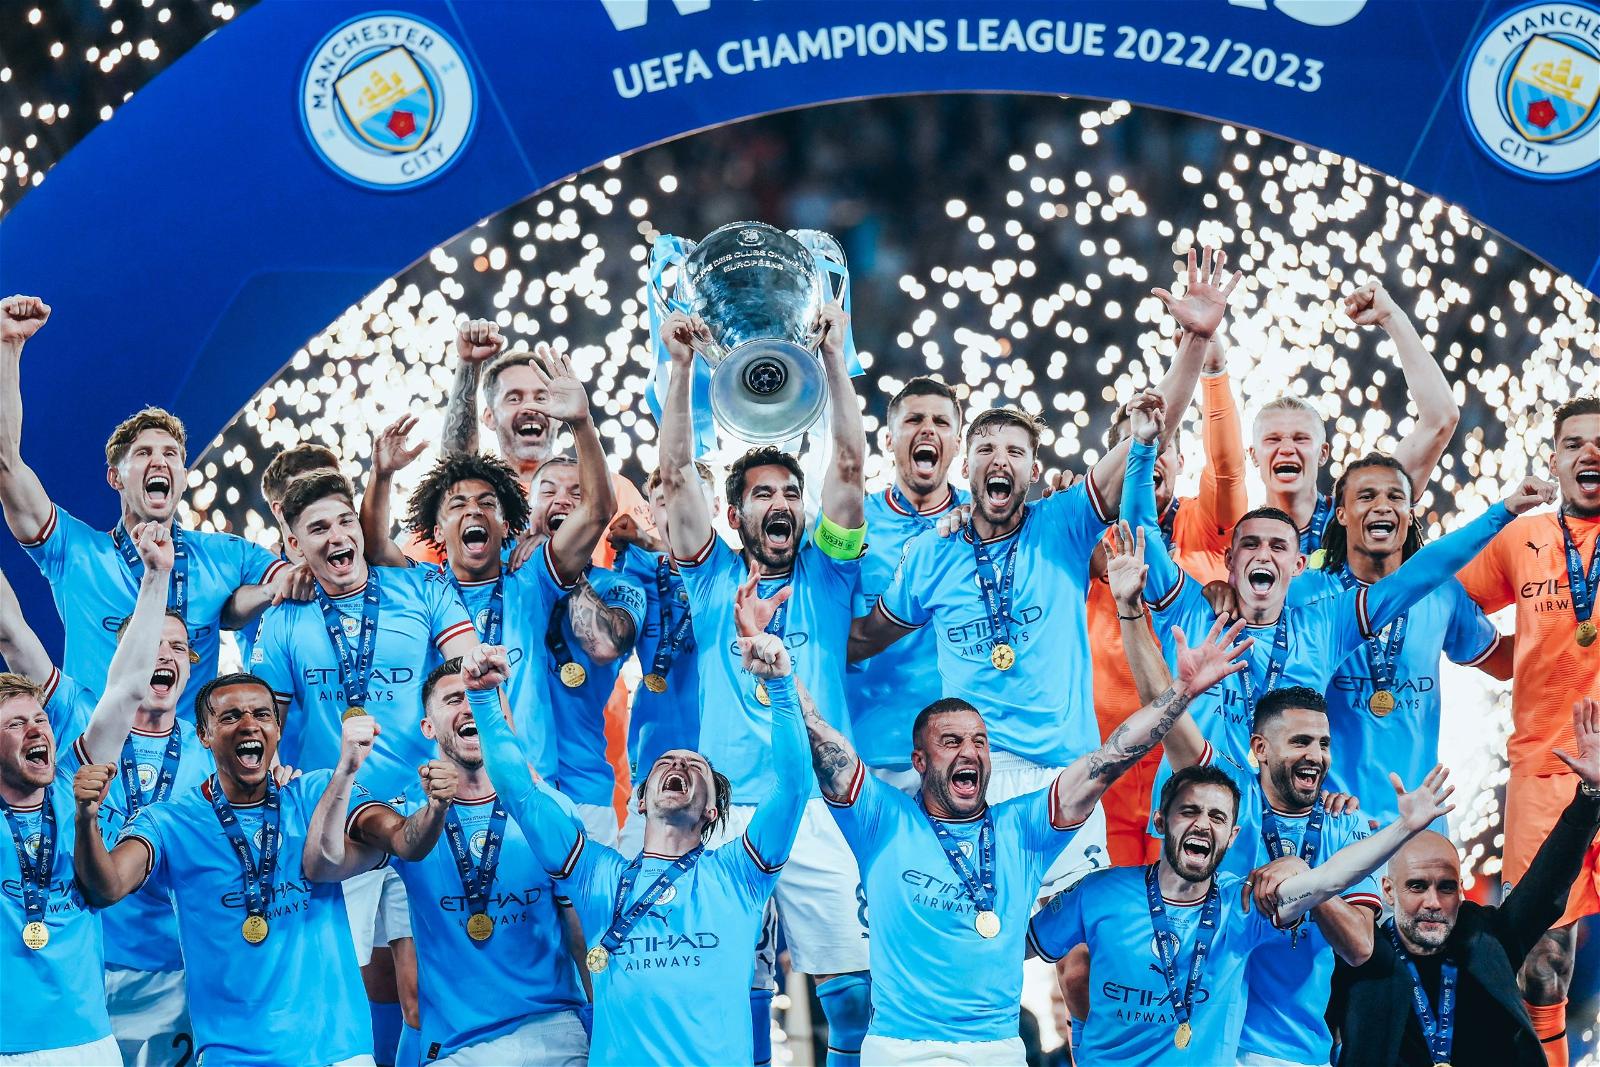 Man City beat Inter Milan to win historic Champions League title